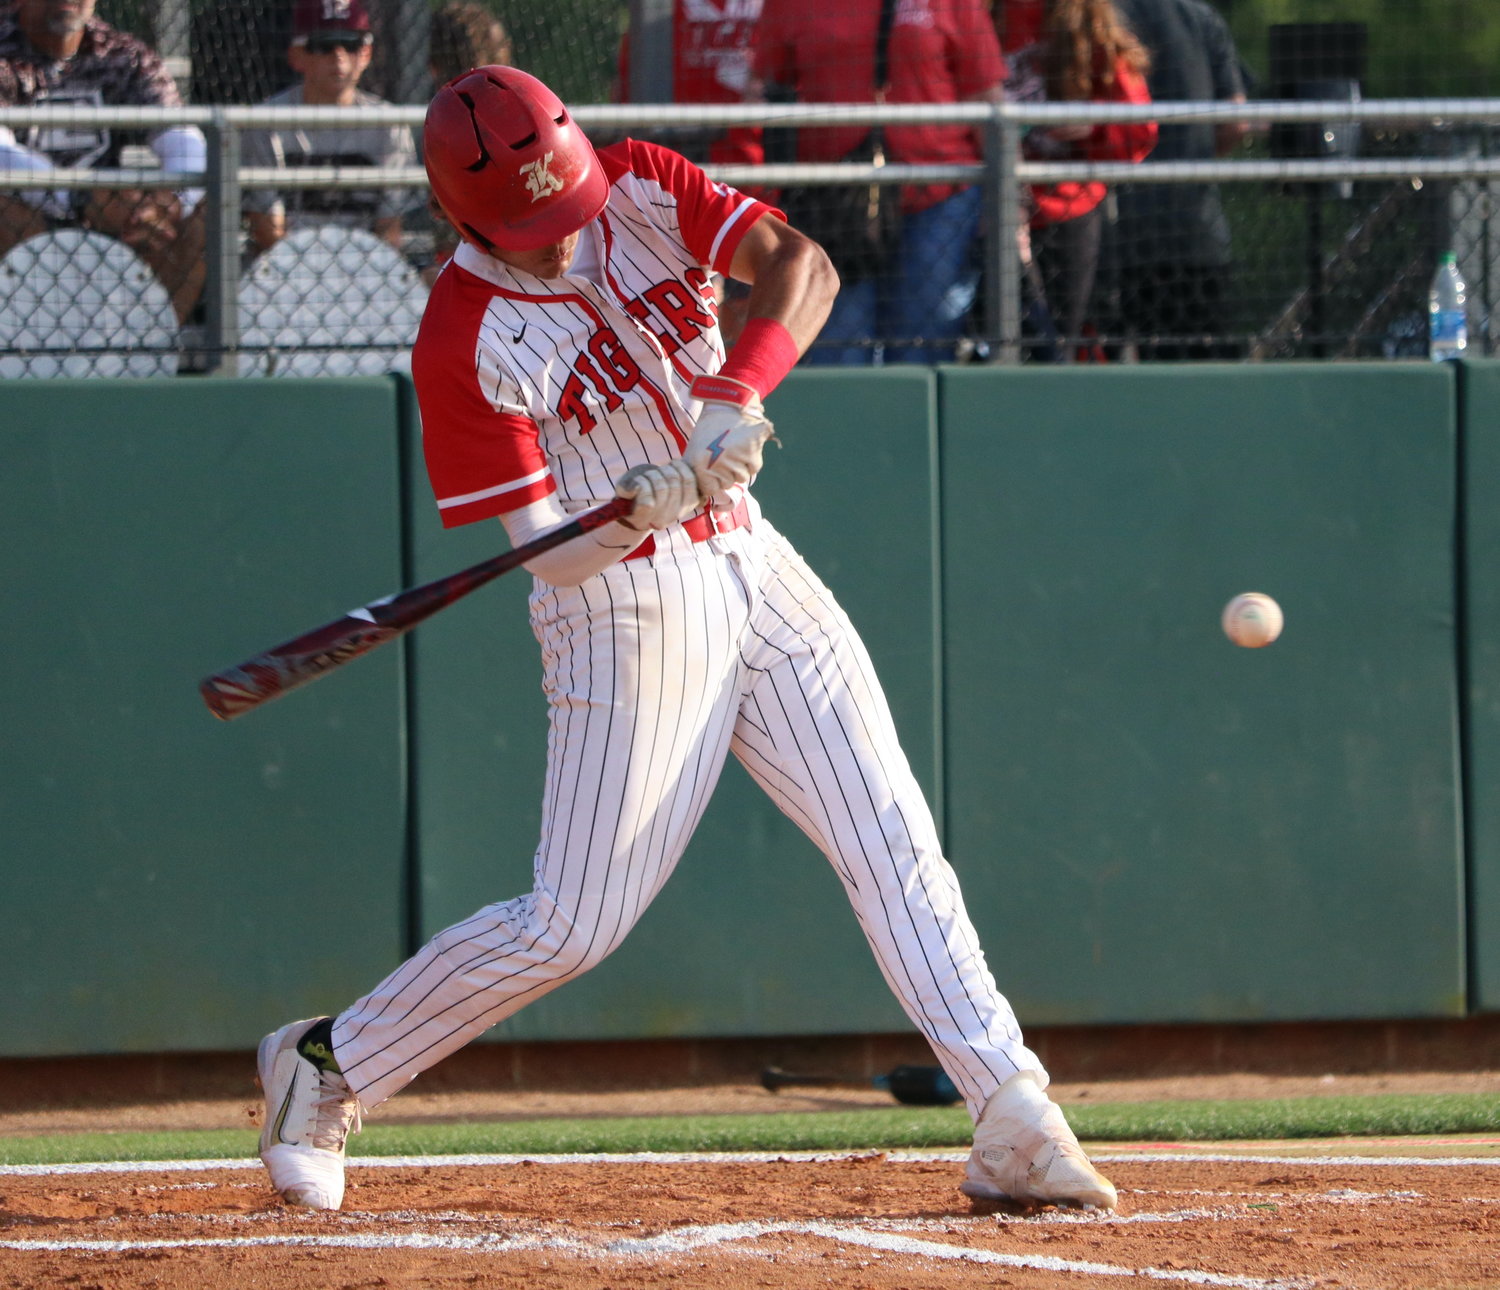 Jhonnatan Ferrebus hits during Friday’s area round game between Katy and Jersey Village at the Katy baseball field.